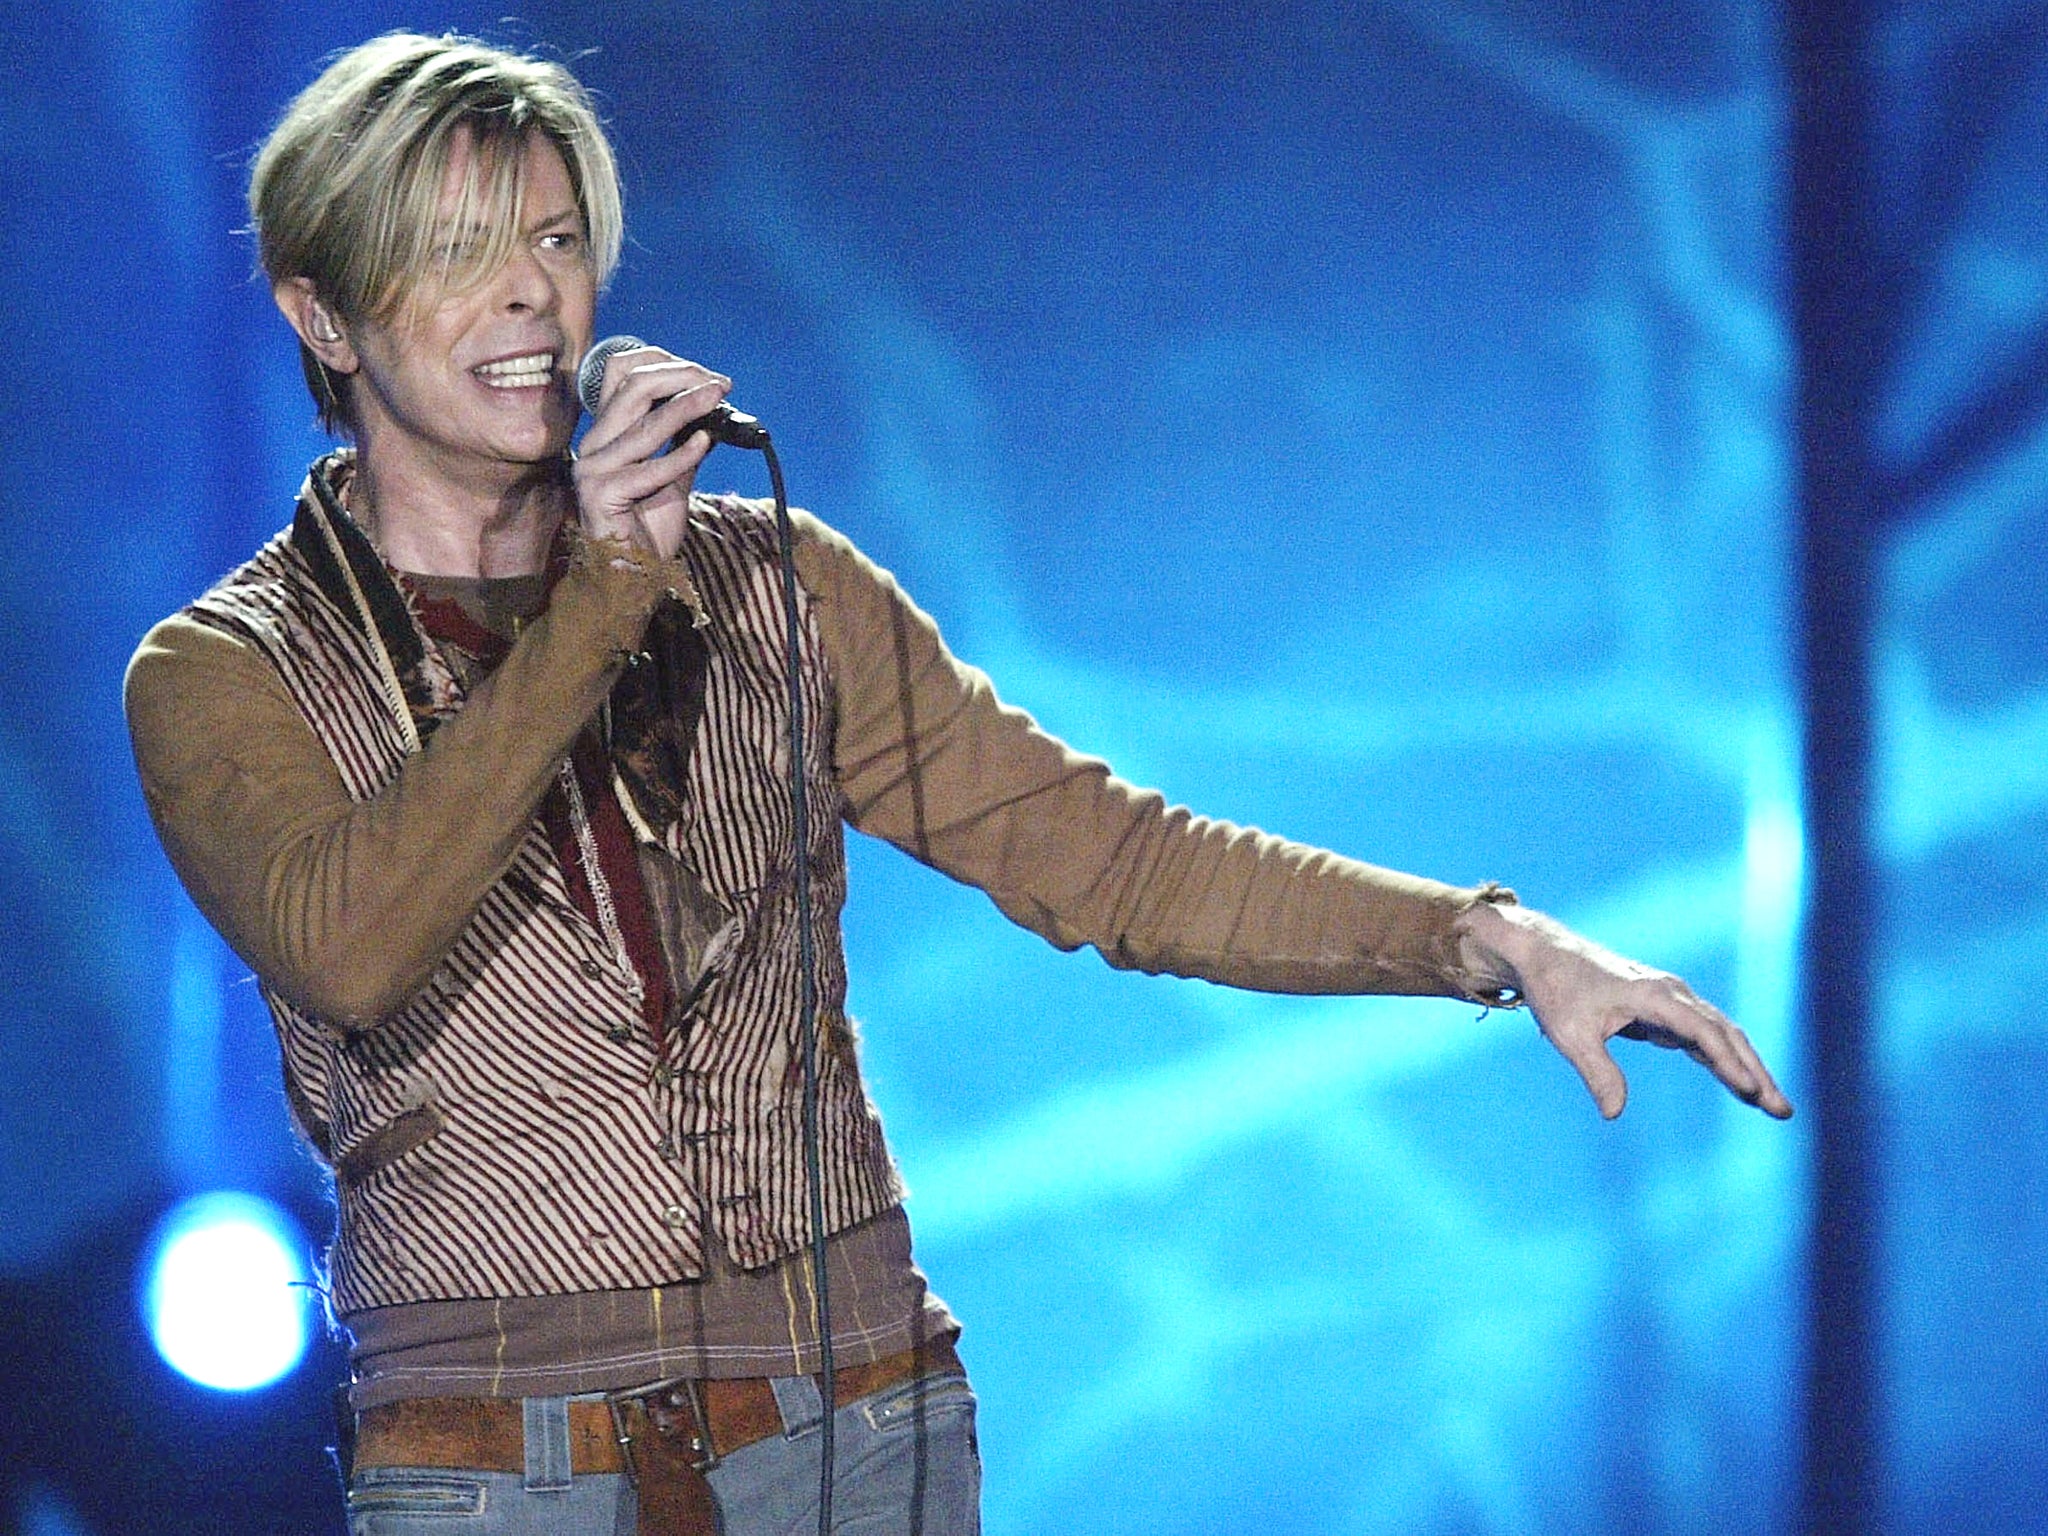 David Bowie released the single on his 66th birthday